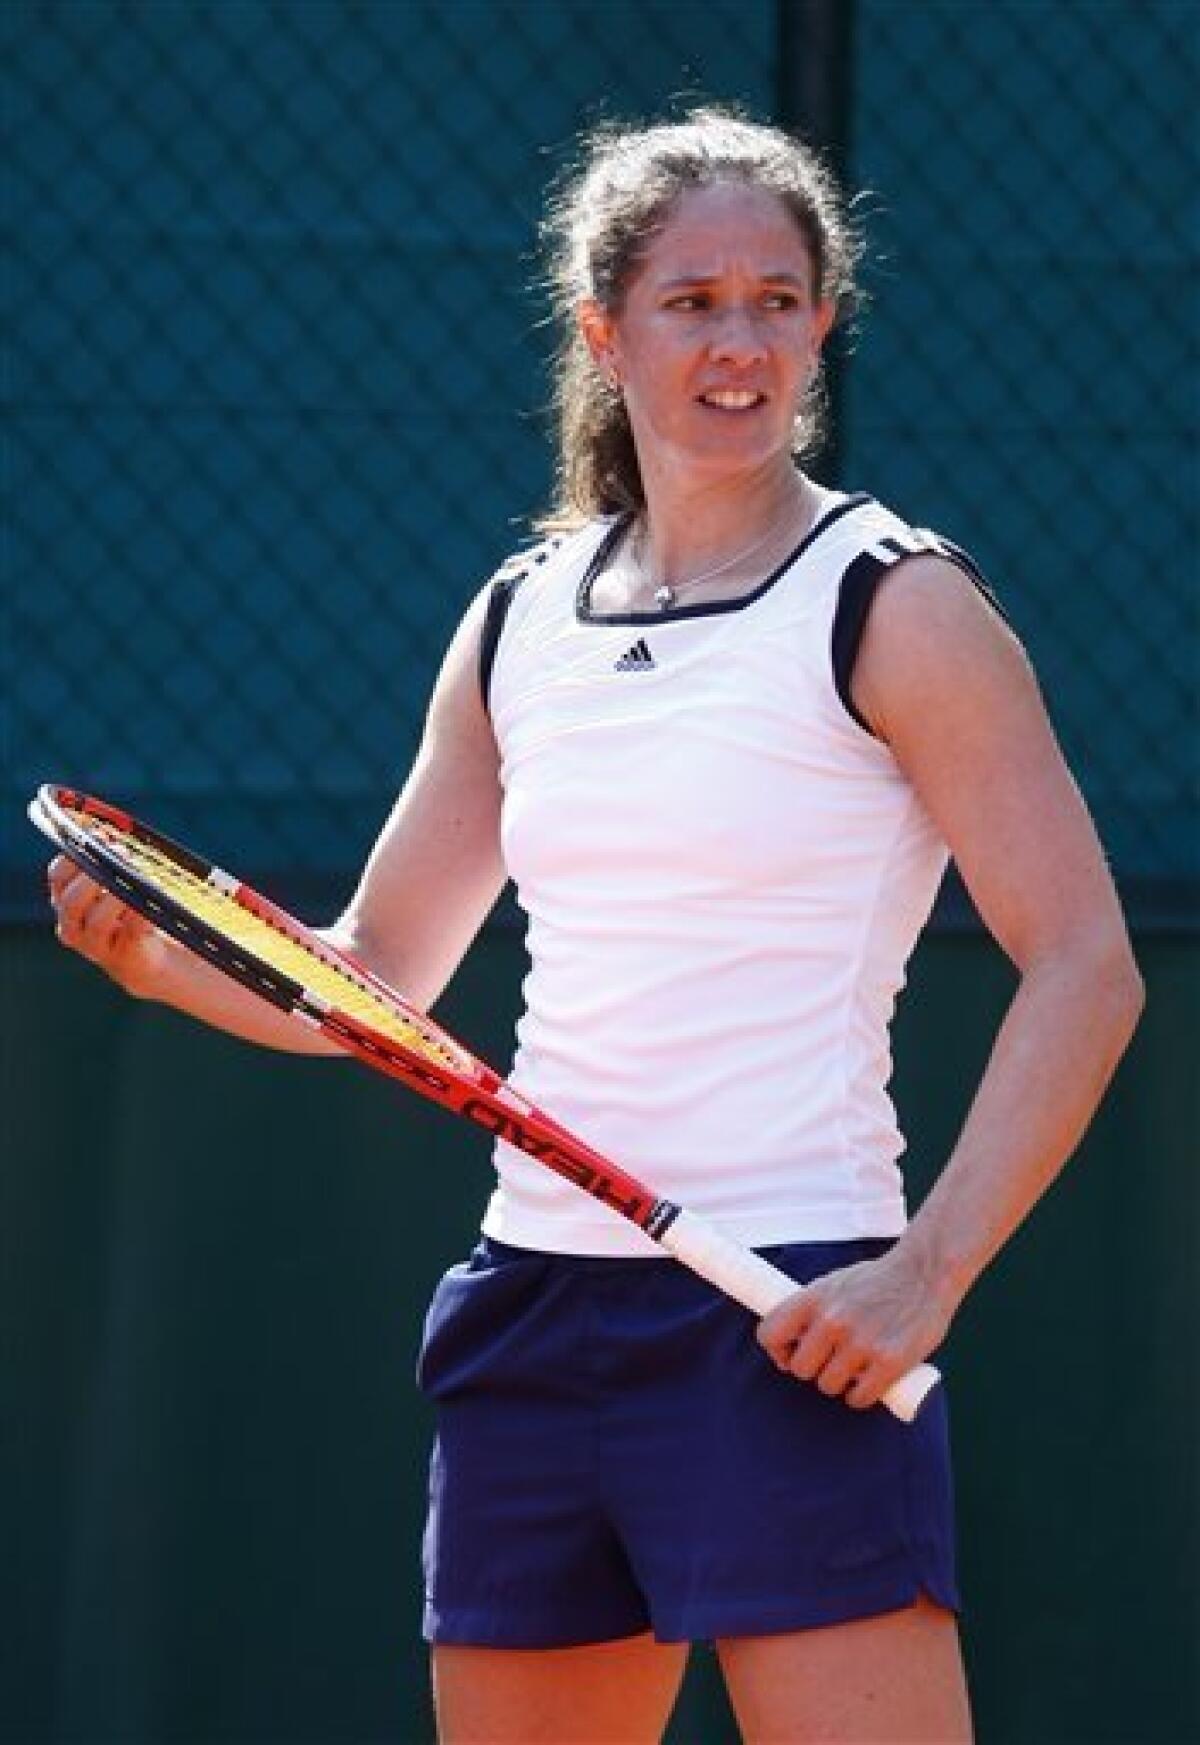 Switzerland's Patty Schnyder reacts during a training session, at Roland Garros stadium in Paris, Saturday, May, 21, 2011. The French Open tennis tournament starts Sunday.(AP Photo/Bertrand Combaldieu)